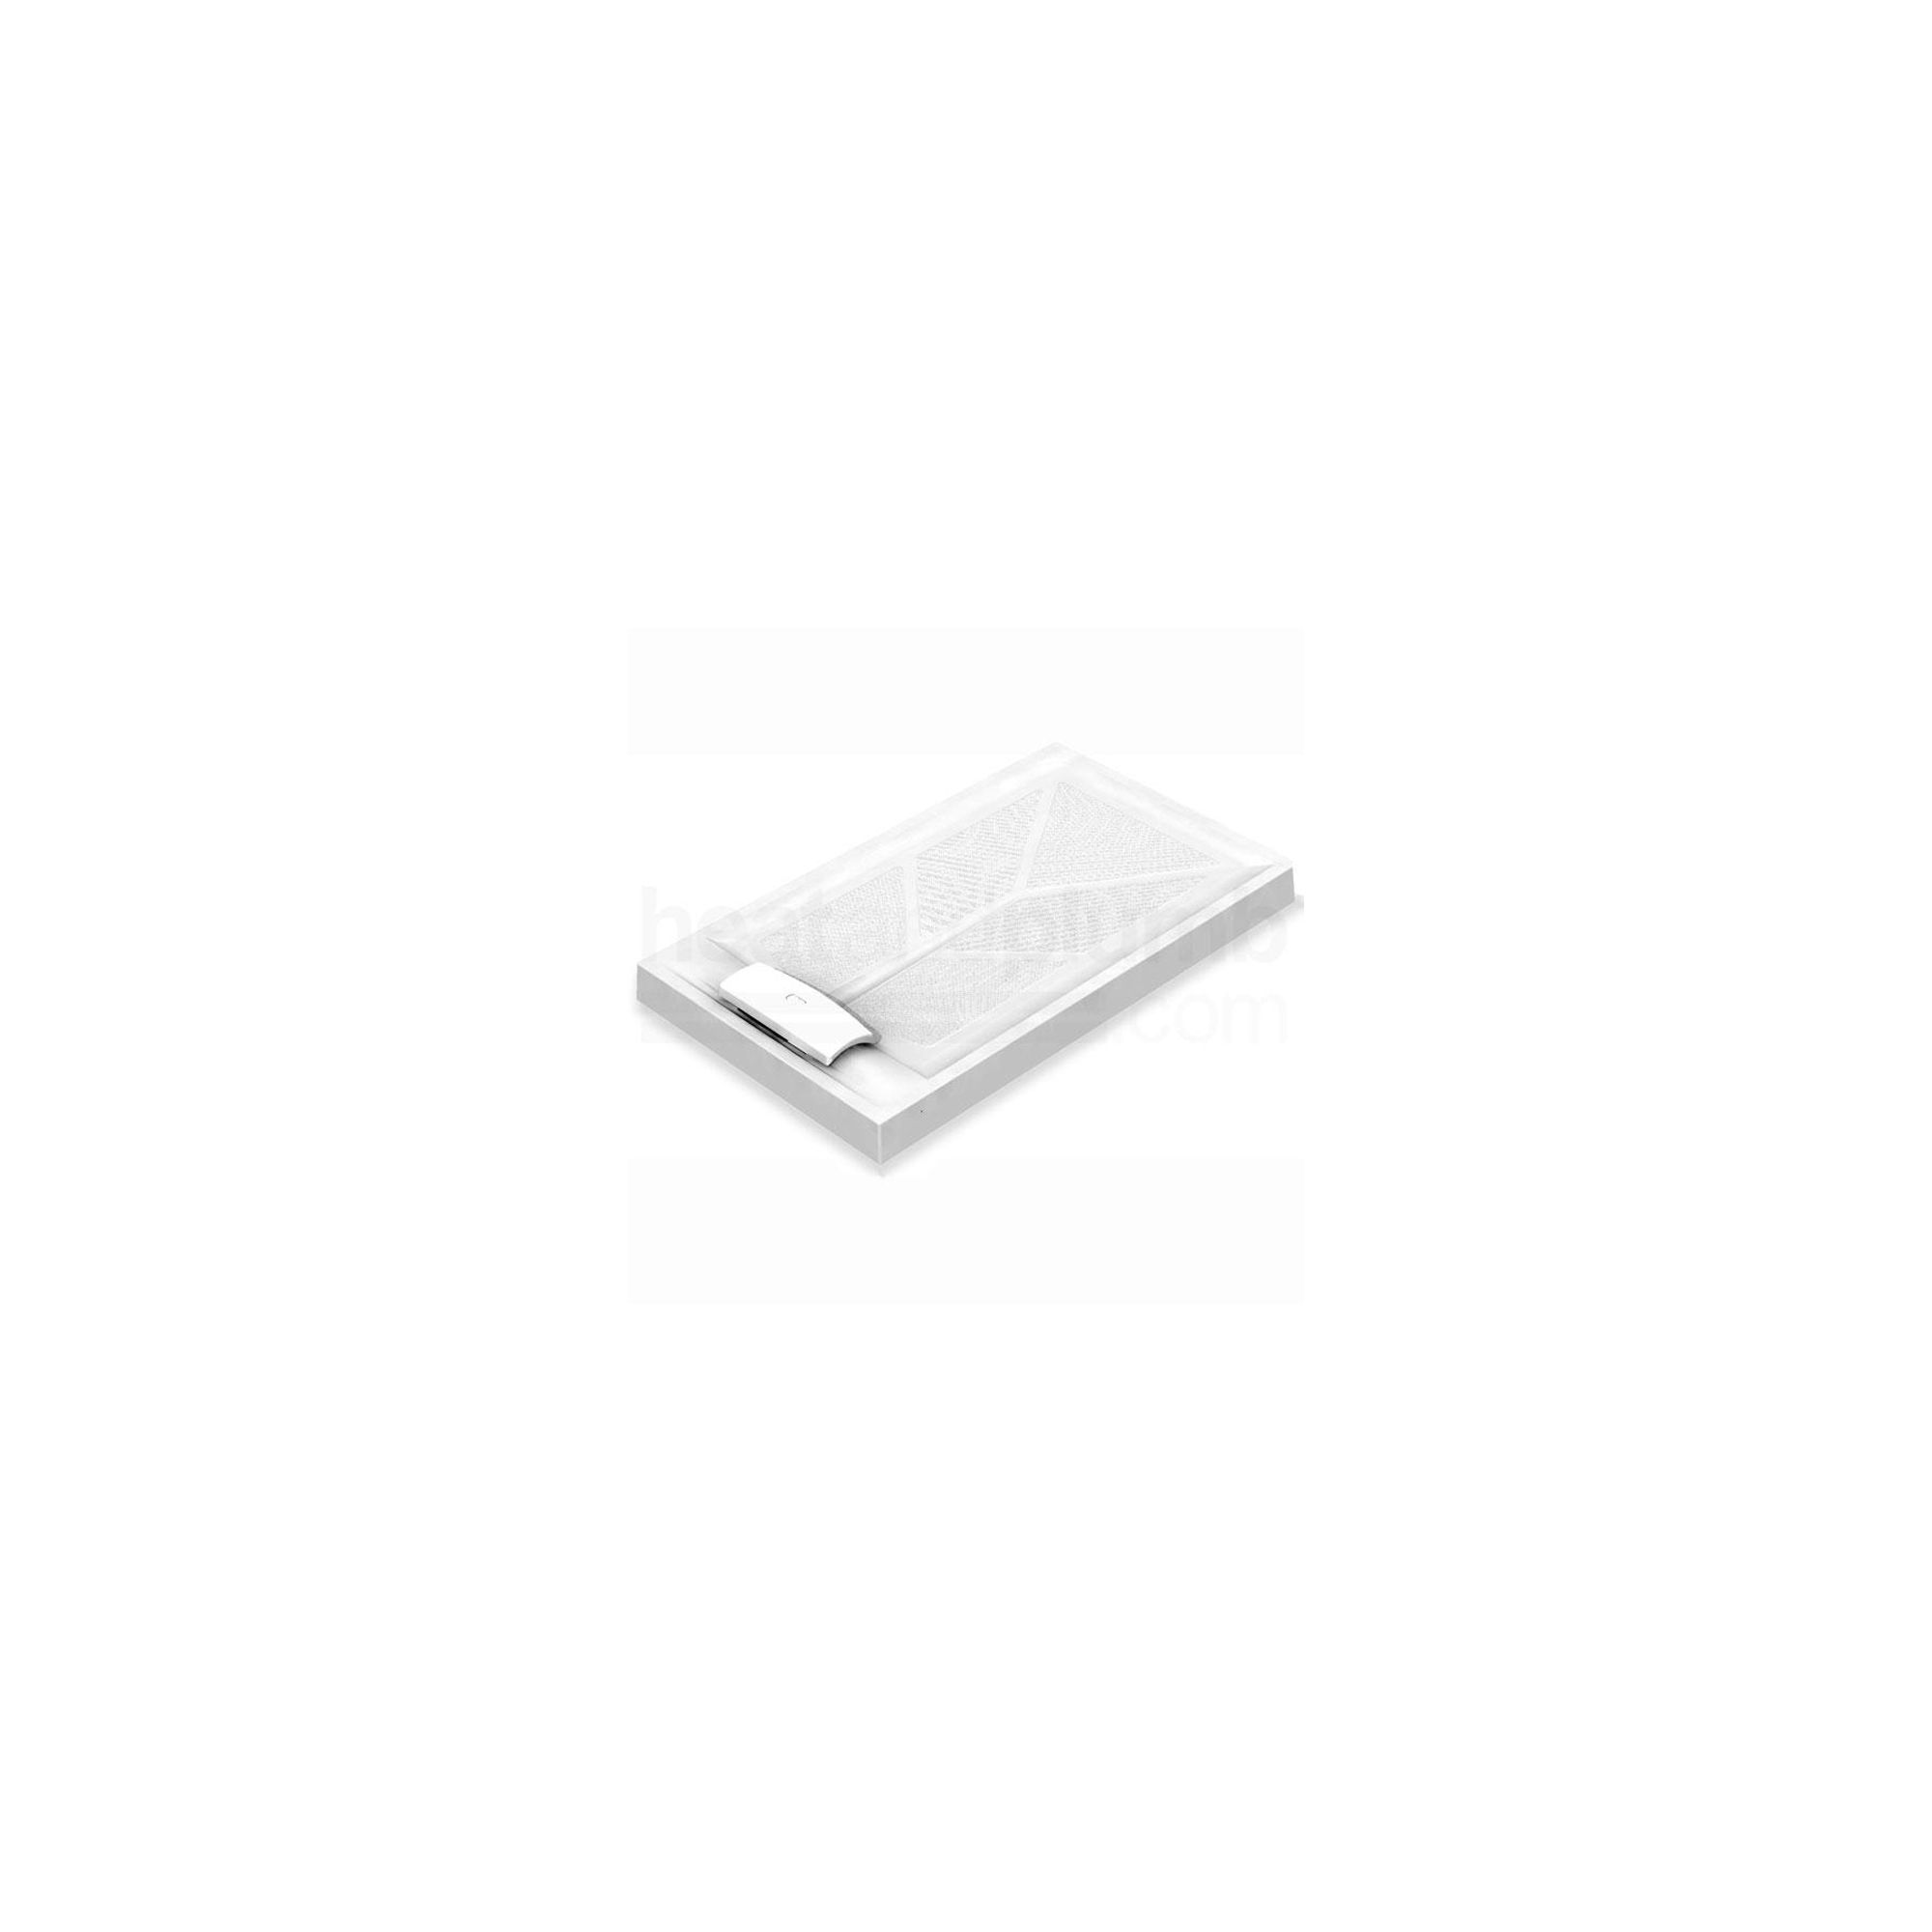 AKW Sulby Rectangular Shower Tray 1420mm x 820mm at Tesco Direct